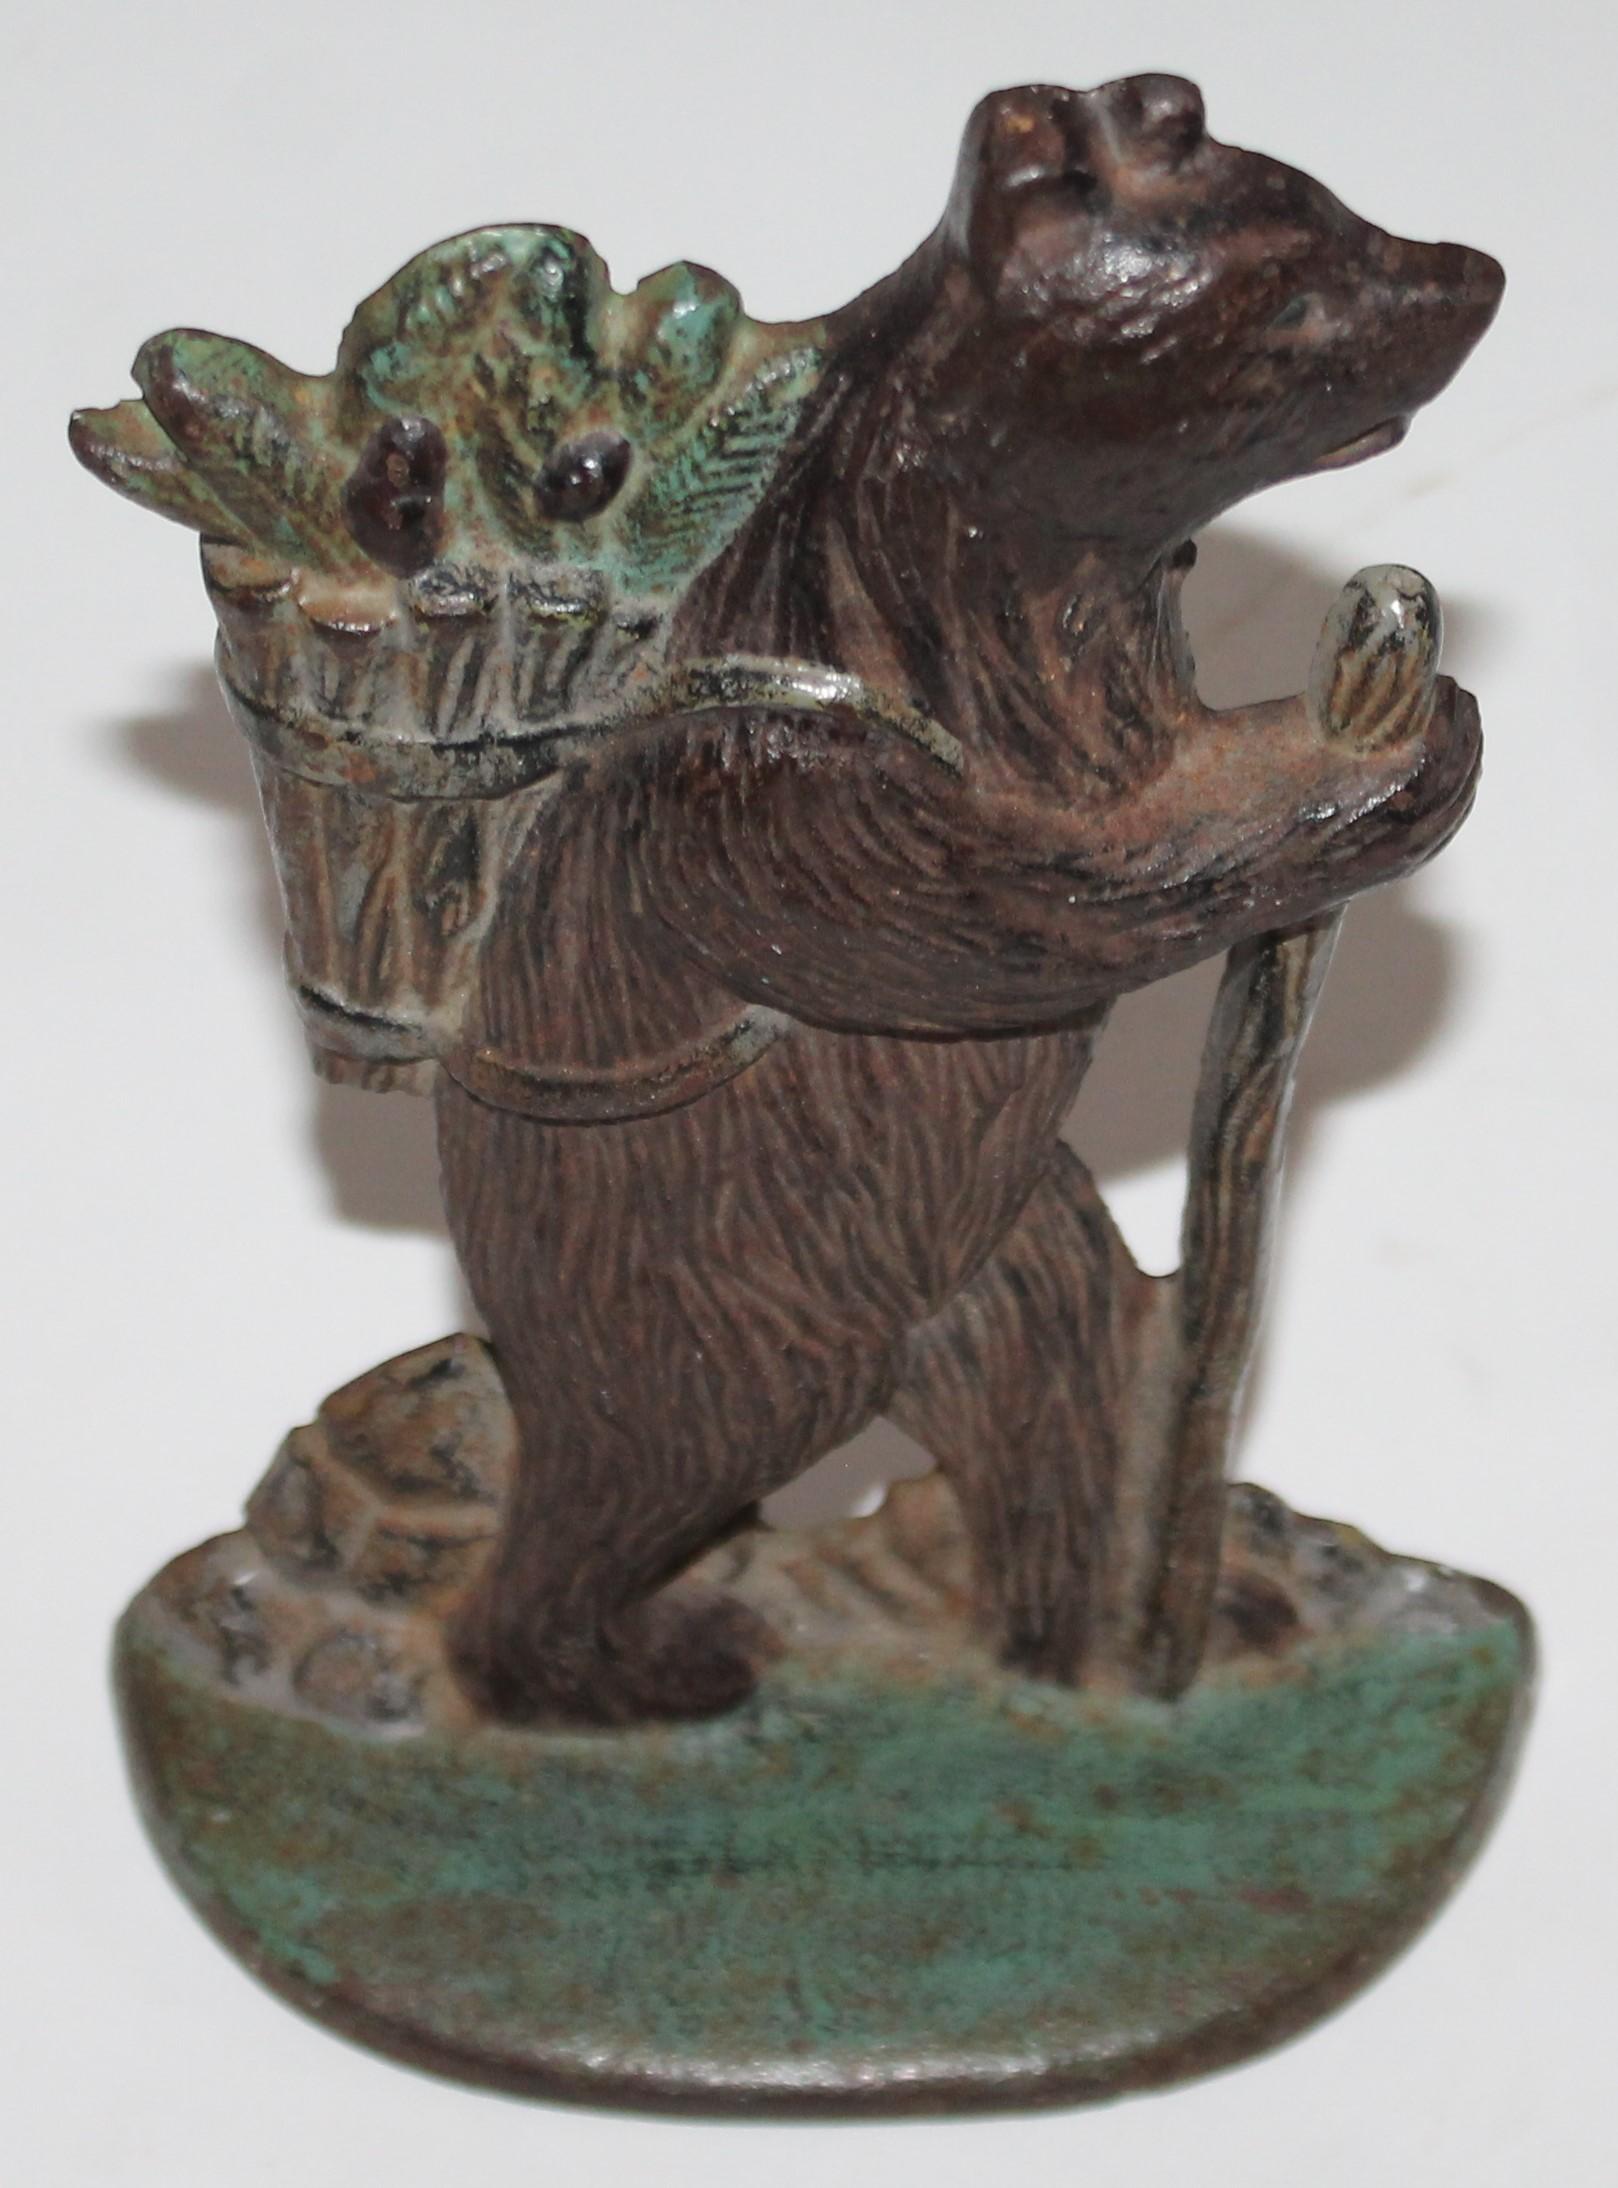 This fun and folky bear doorstop is in good condition with worn paint on the front of the bear.